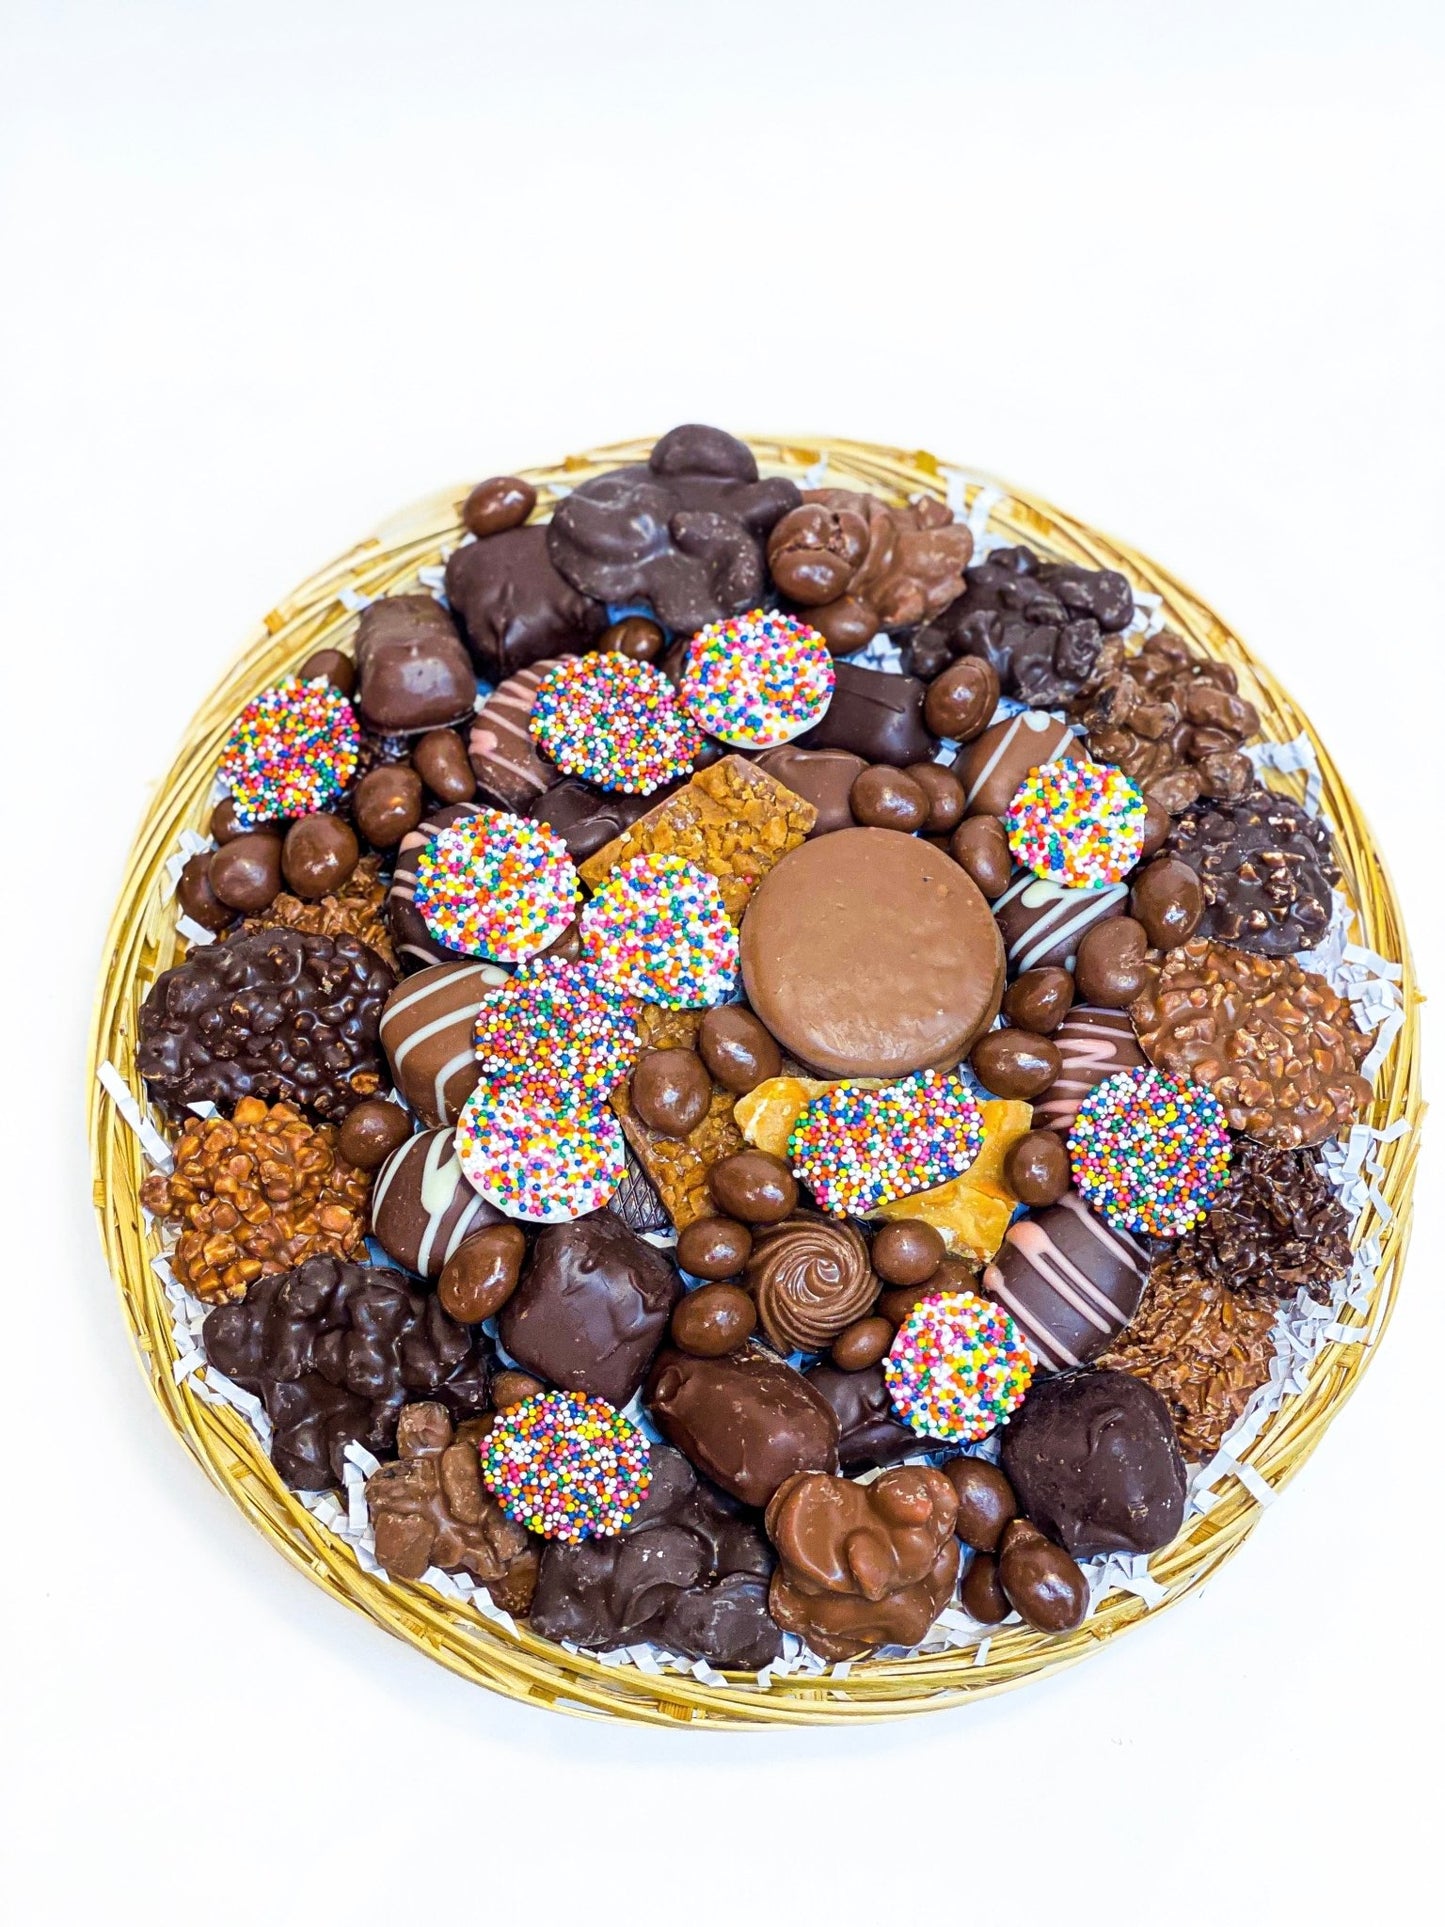 Holiday Chocolate Decadence Tray - Sweeties Candy Cottage